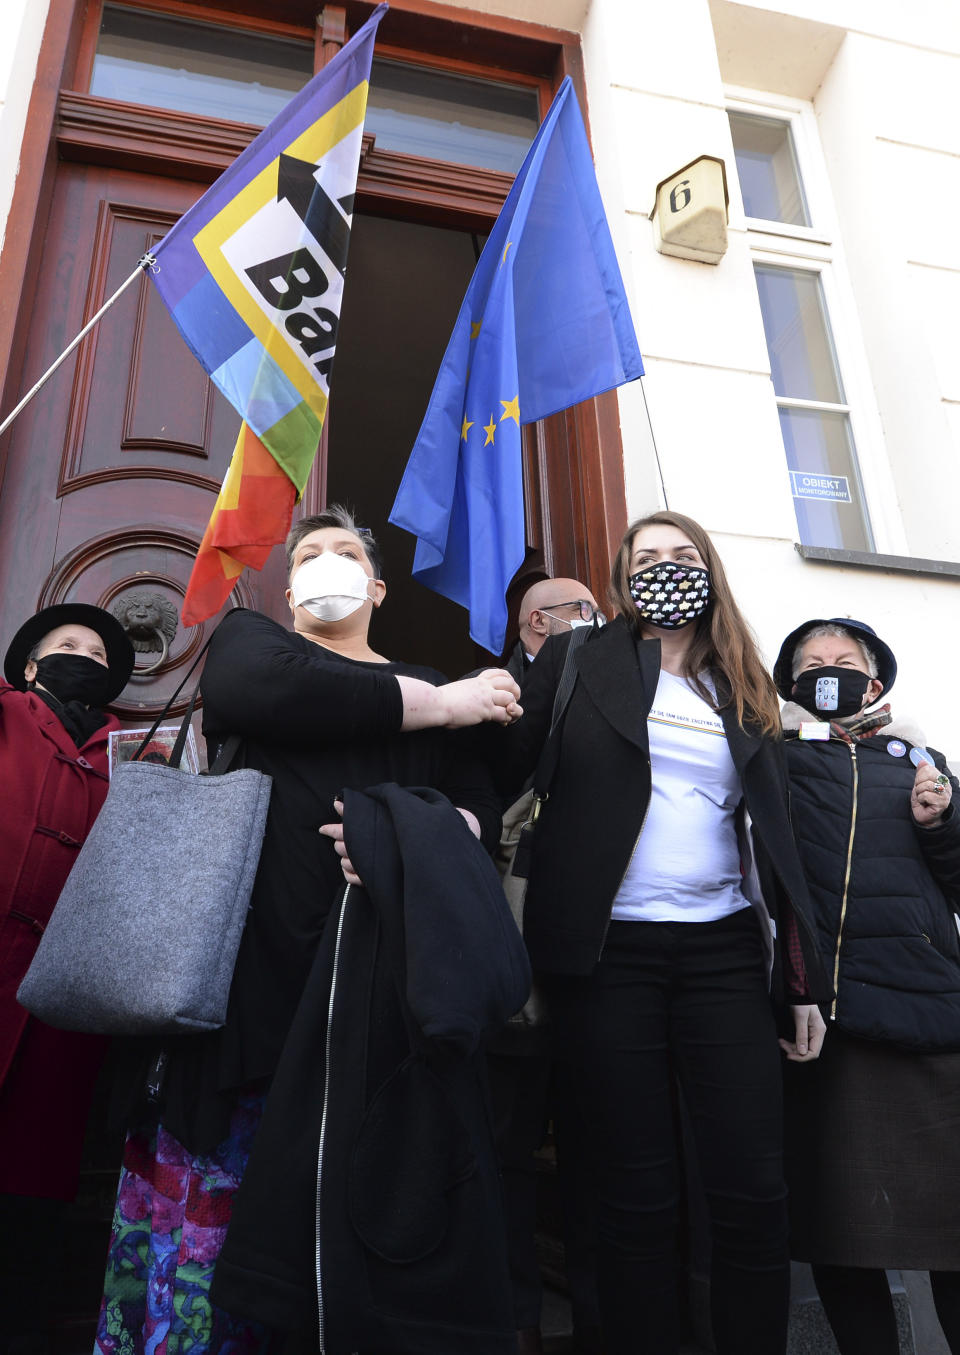 Polish activists Elzbieta Podlesna, left, and Anna Prus surround by supporters as they leave court after being acquitted of desecration by a court in Plock, Poland, Tuesday March 2, 2021. A Polish court has acquitted three activists who had been accused of desecration for adding the LGBT rainbow to images of a revered Roman Catholic icon. In posters that they put up in protest in their city of Plock, the activists used the rainbow in place of halos on a revered image of the Virgin Mary and baby Jesus. (AP Photo/Czarek Sokolowski)